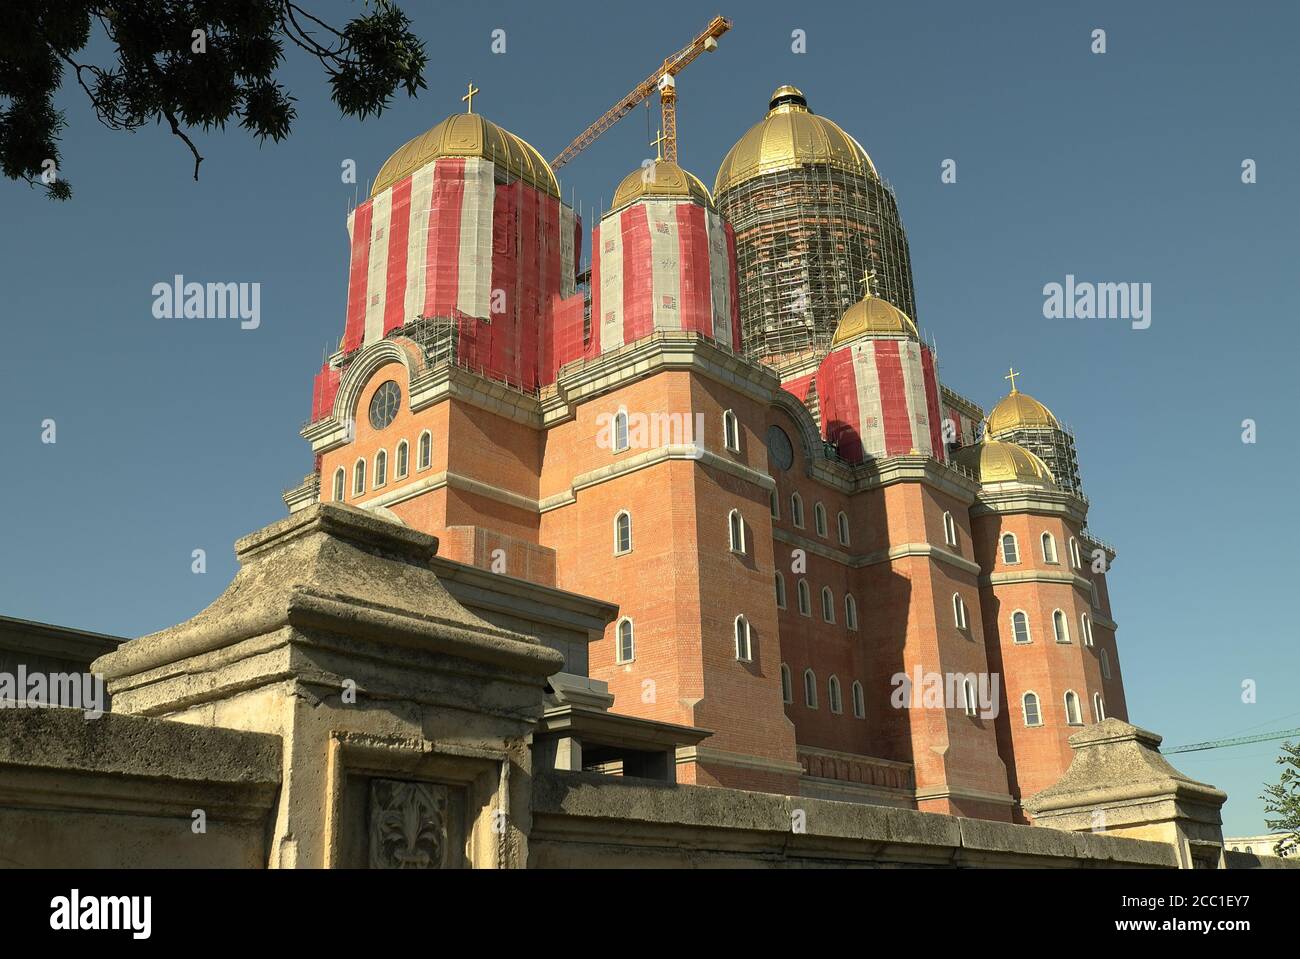 The final stages of the building of the controversial new Romanian Orthodox cathedral in Bucharest, 2020. The largest of its kind in Europe. Stock Photo